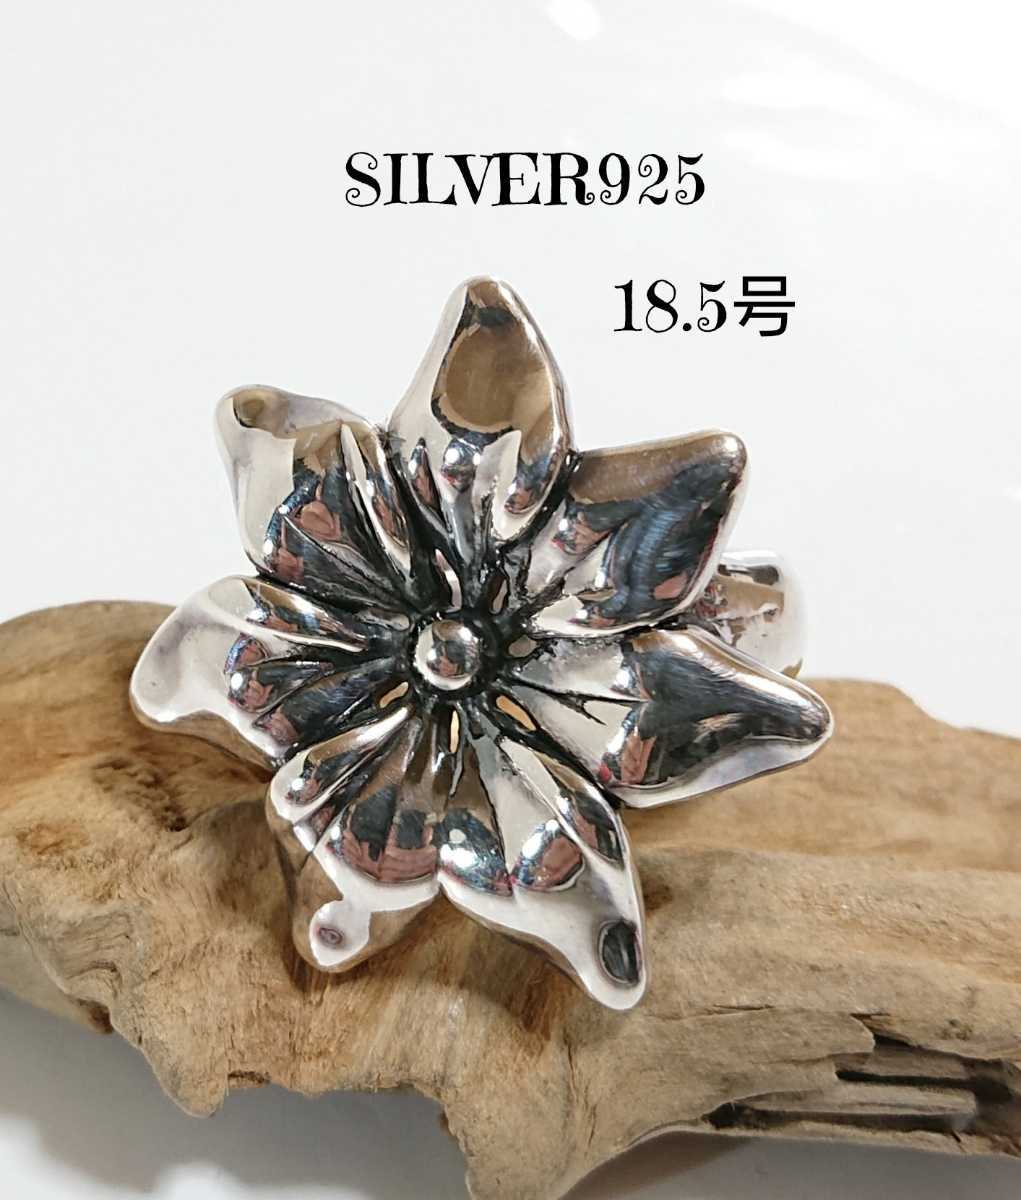 4265 Silver925 ★ Ultra Loolweight ★ Extra Antique Flaw Walling № 18,5 Silver 925 Holder Design Design Hollow Toys Retro Cheap Fashionable